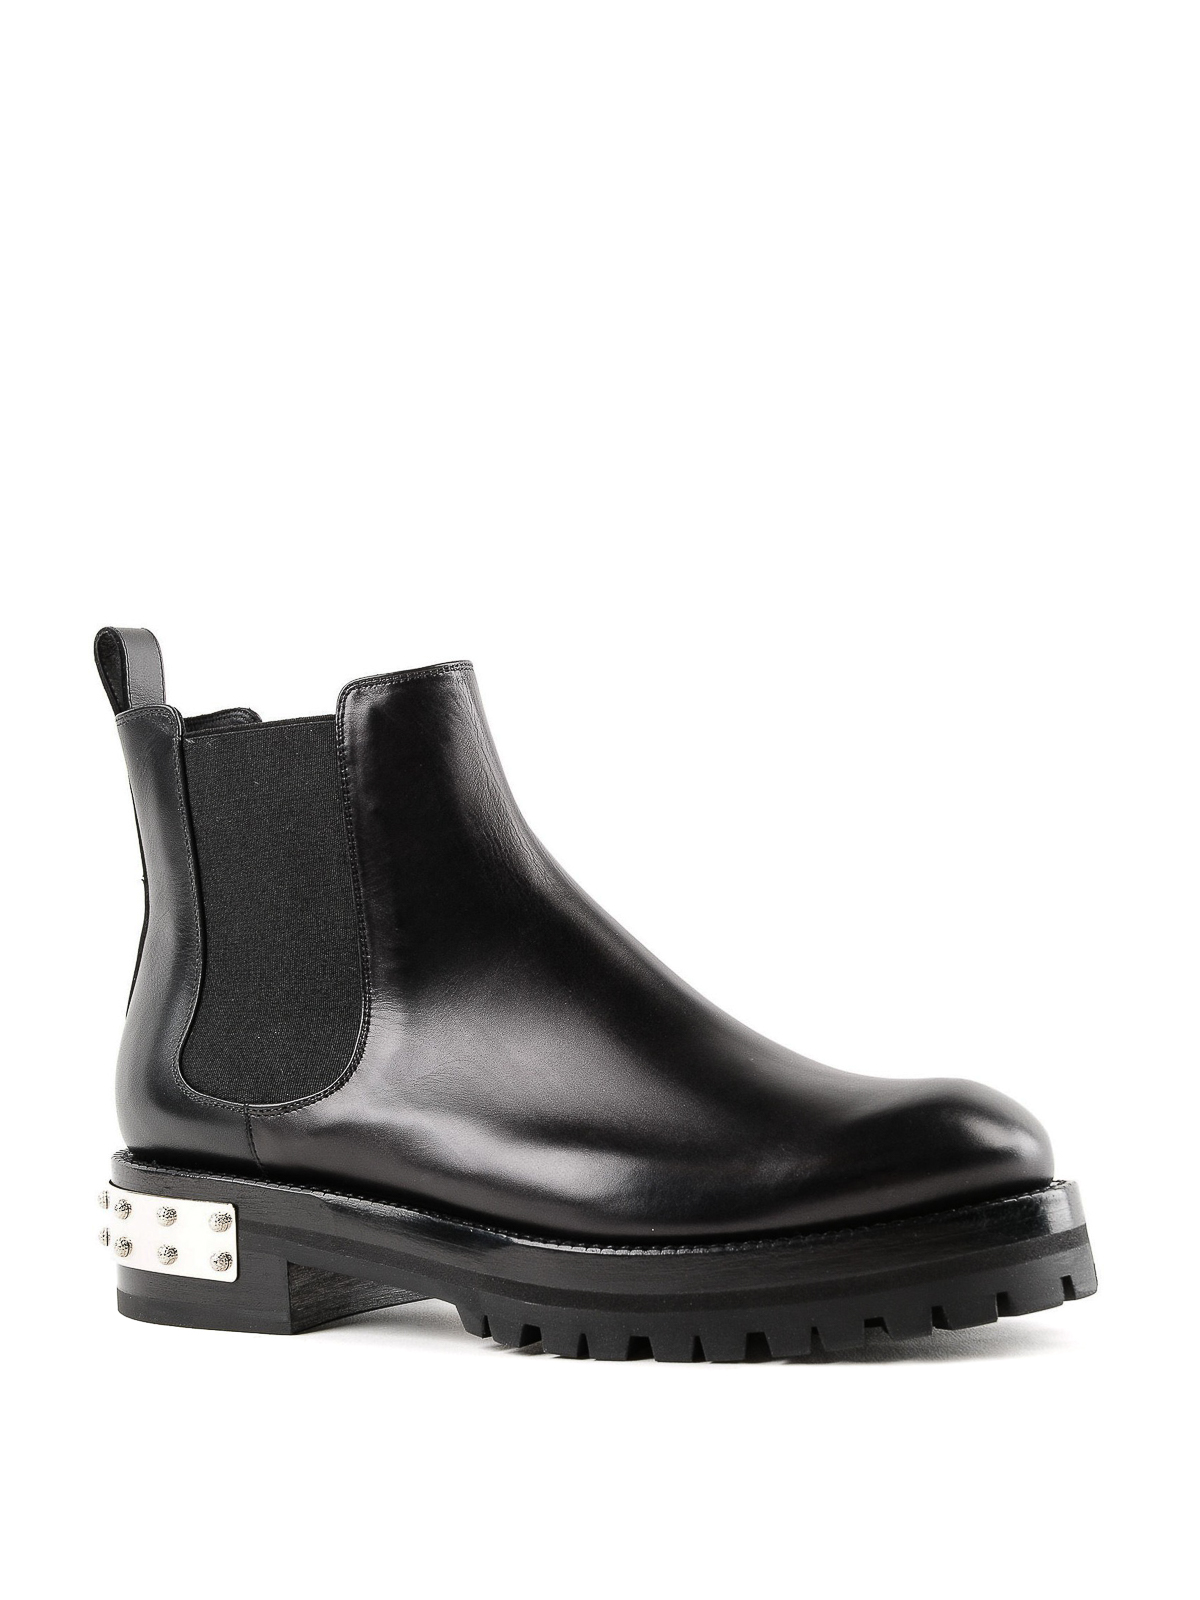 Feasibility let Mantle Ankle boots Alexander Mcqueen - Mod black leather booties - 462300WHPP11000